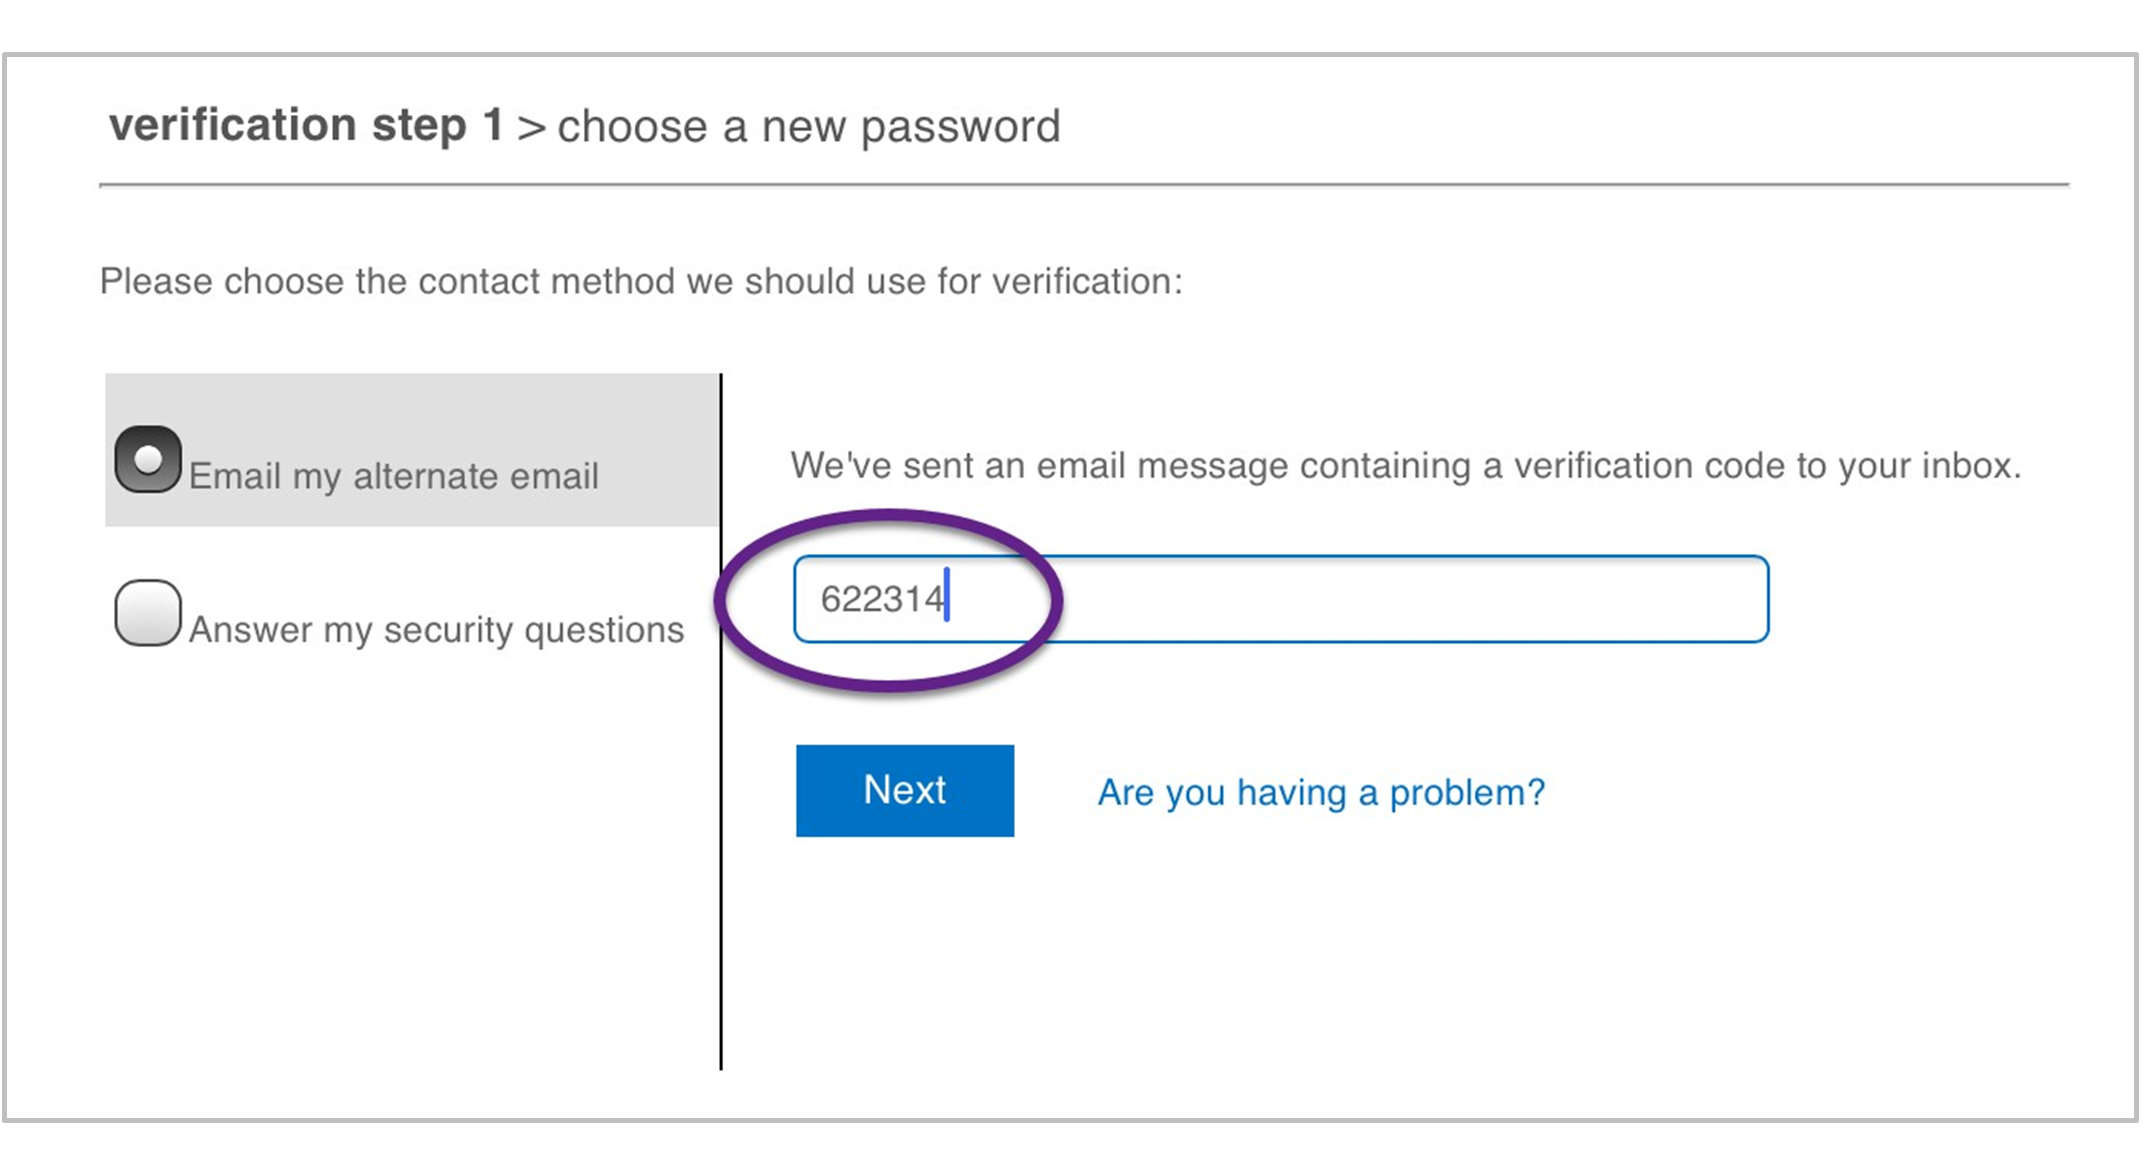 Screenshot of verification step 1 with a verification code to use in your email